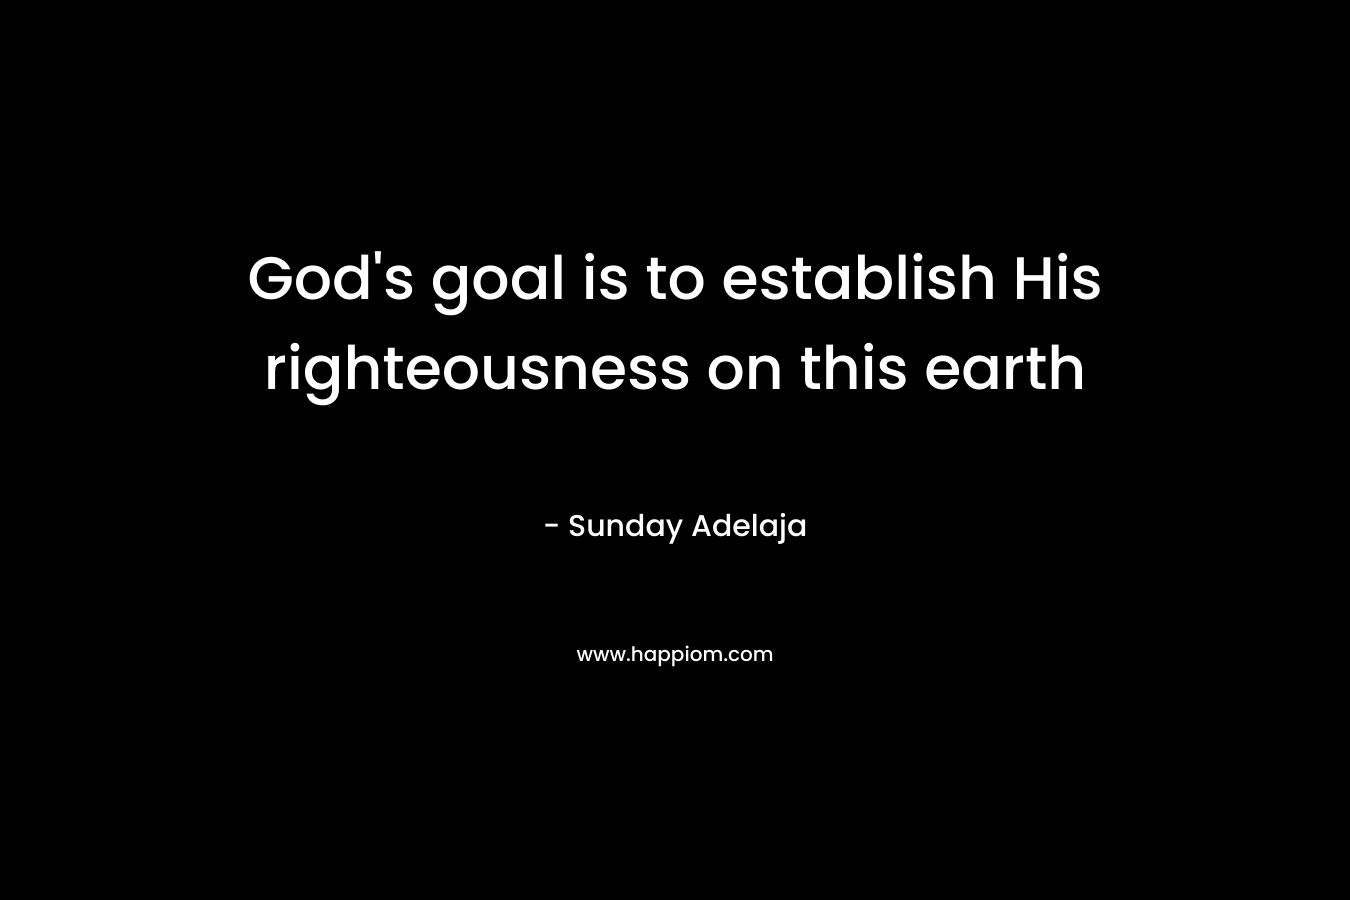 God's goal is to establish His righteousness on this earth